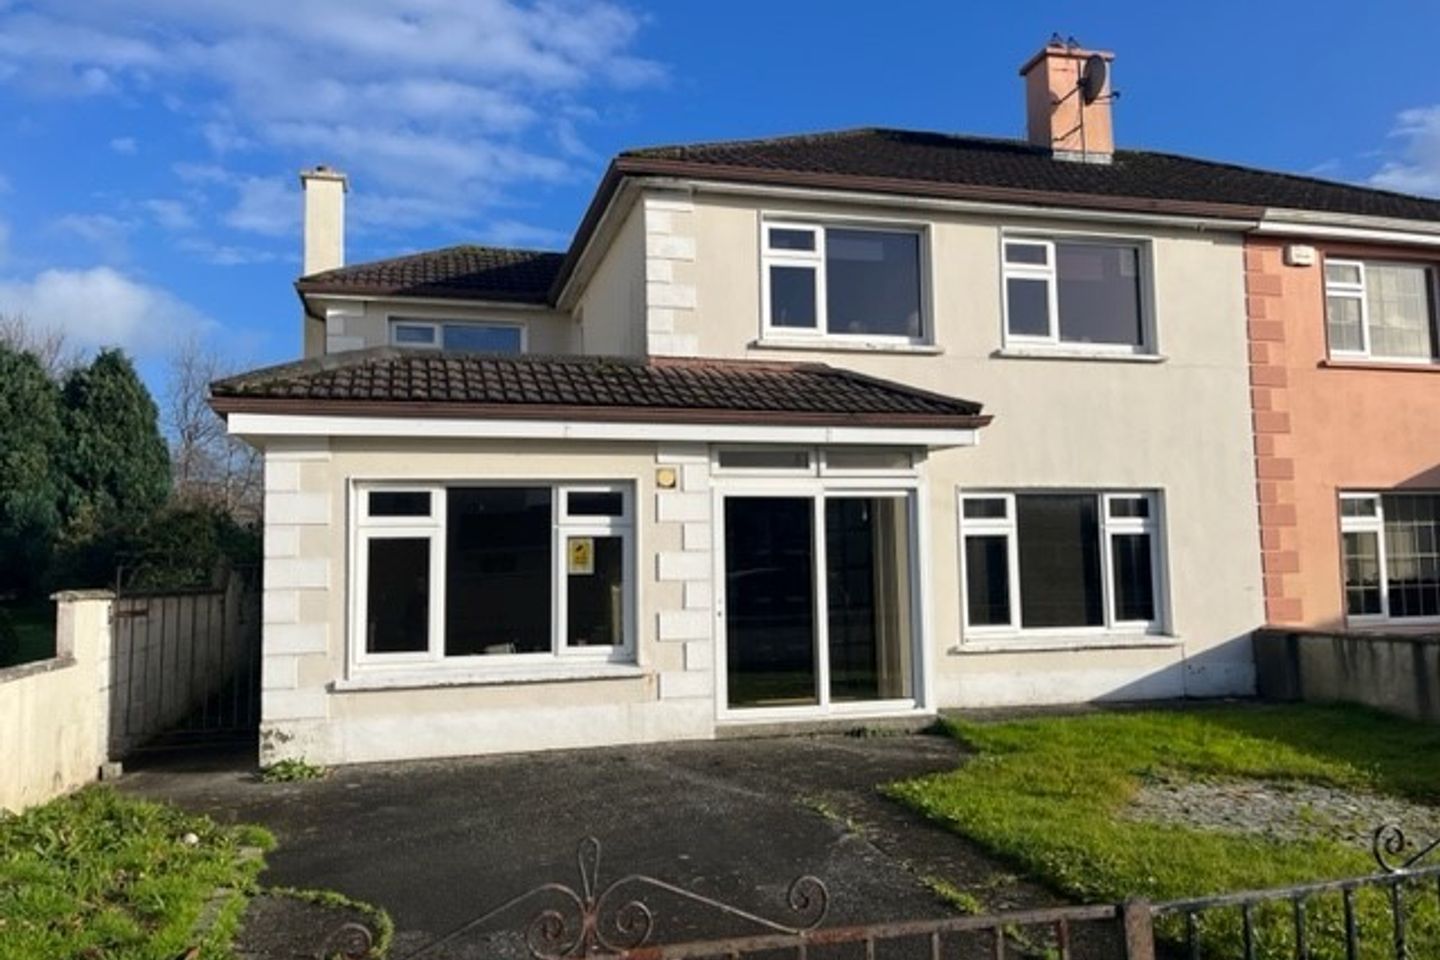 20 Cahermoneen, Tralee, Co. Kerry, V92HDW6